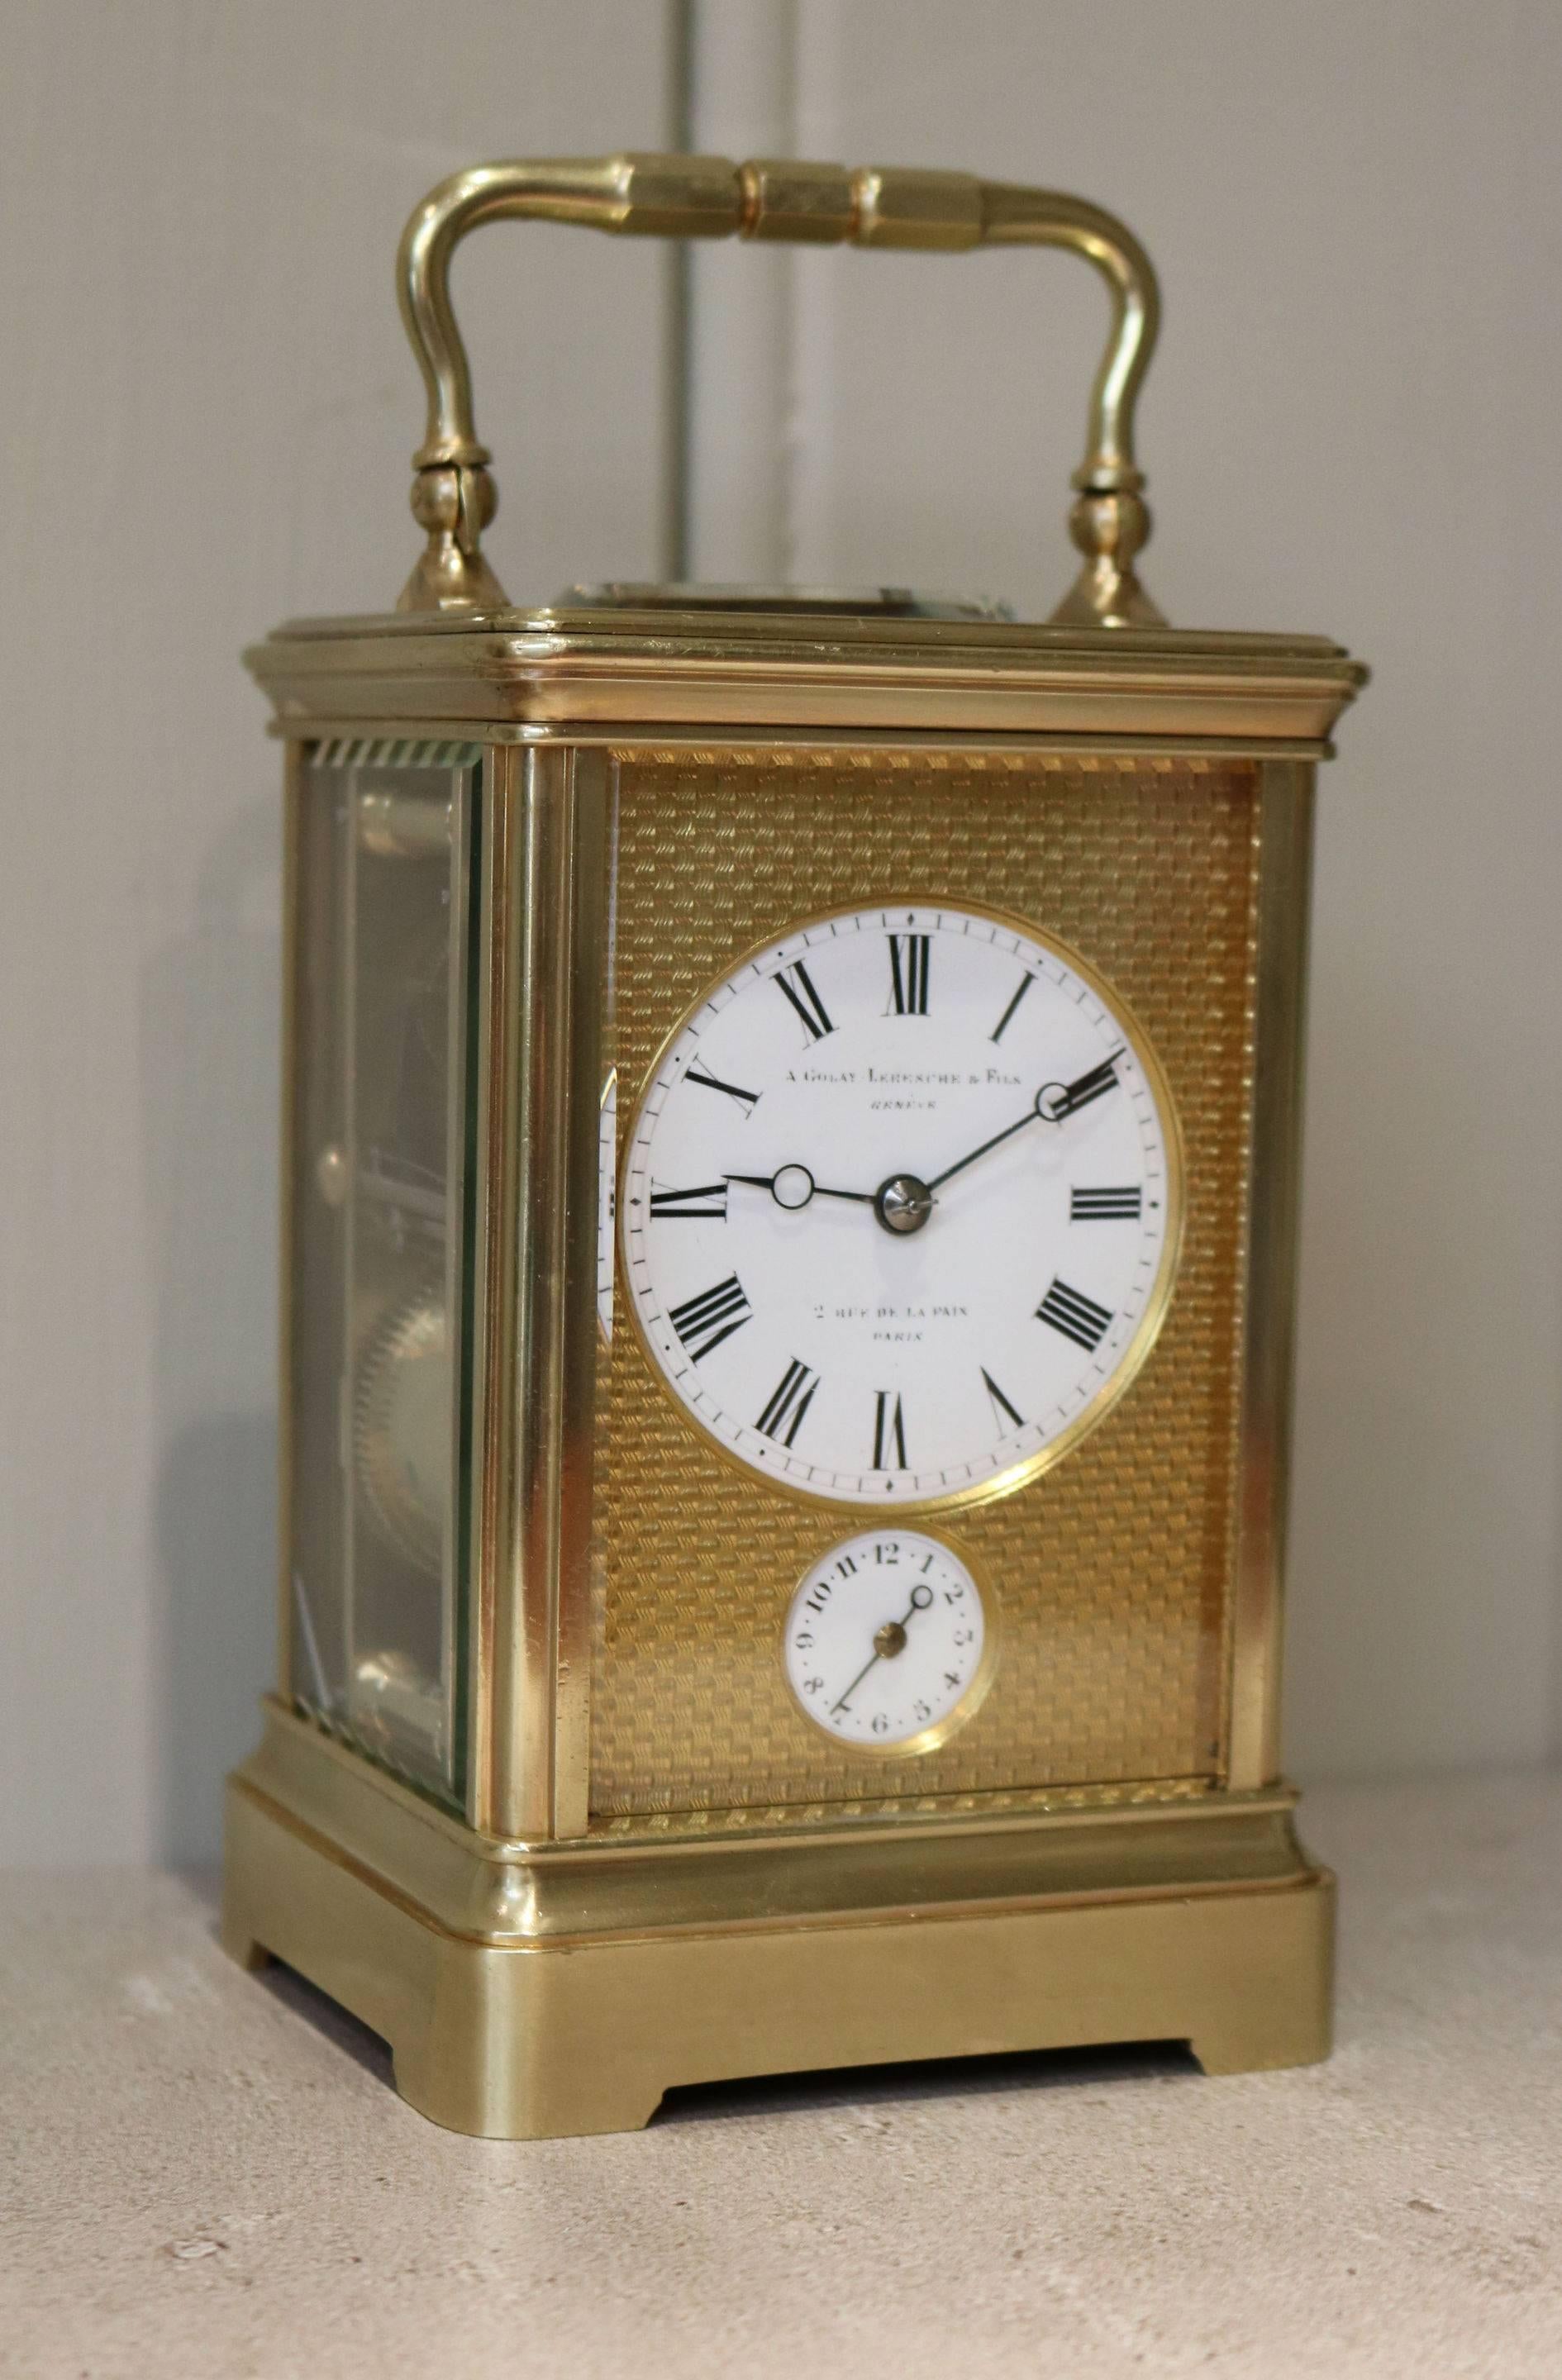 A fine mid-19th century polished brass carriage clock. It has a shaped top handle and a thick oval bevel edge glass. The engine turned gilt dial mask has an enamel dial and a subsidiary alarm dial. It is signed by the original retailers, A Golay